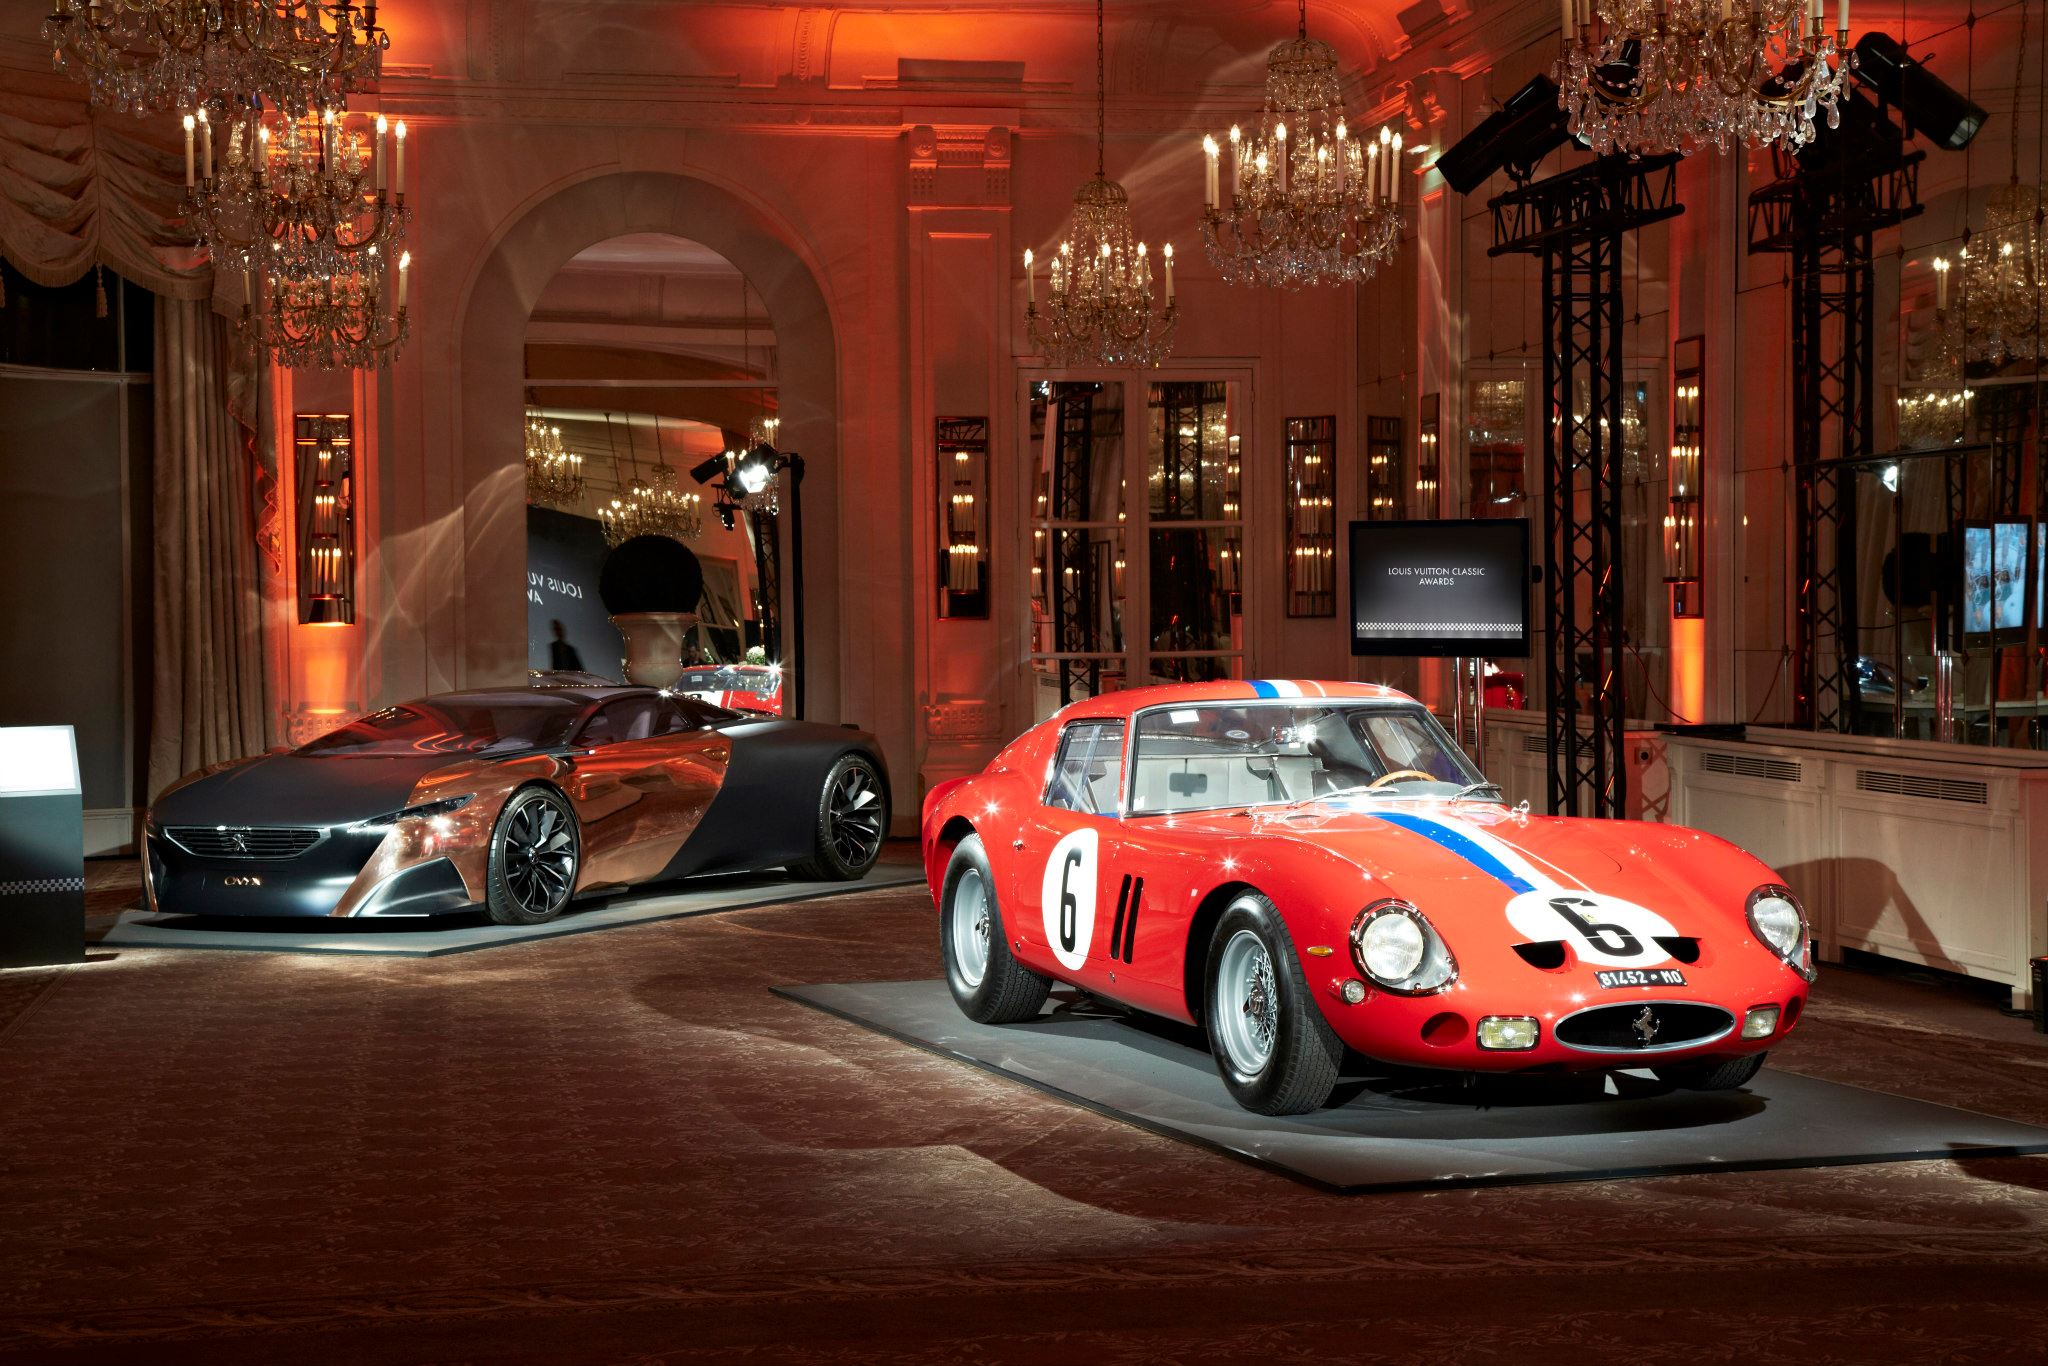 The winning cars of the 2013 Louis Vuitton Classic Awards 